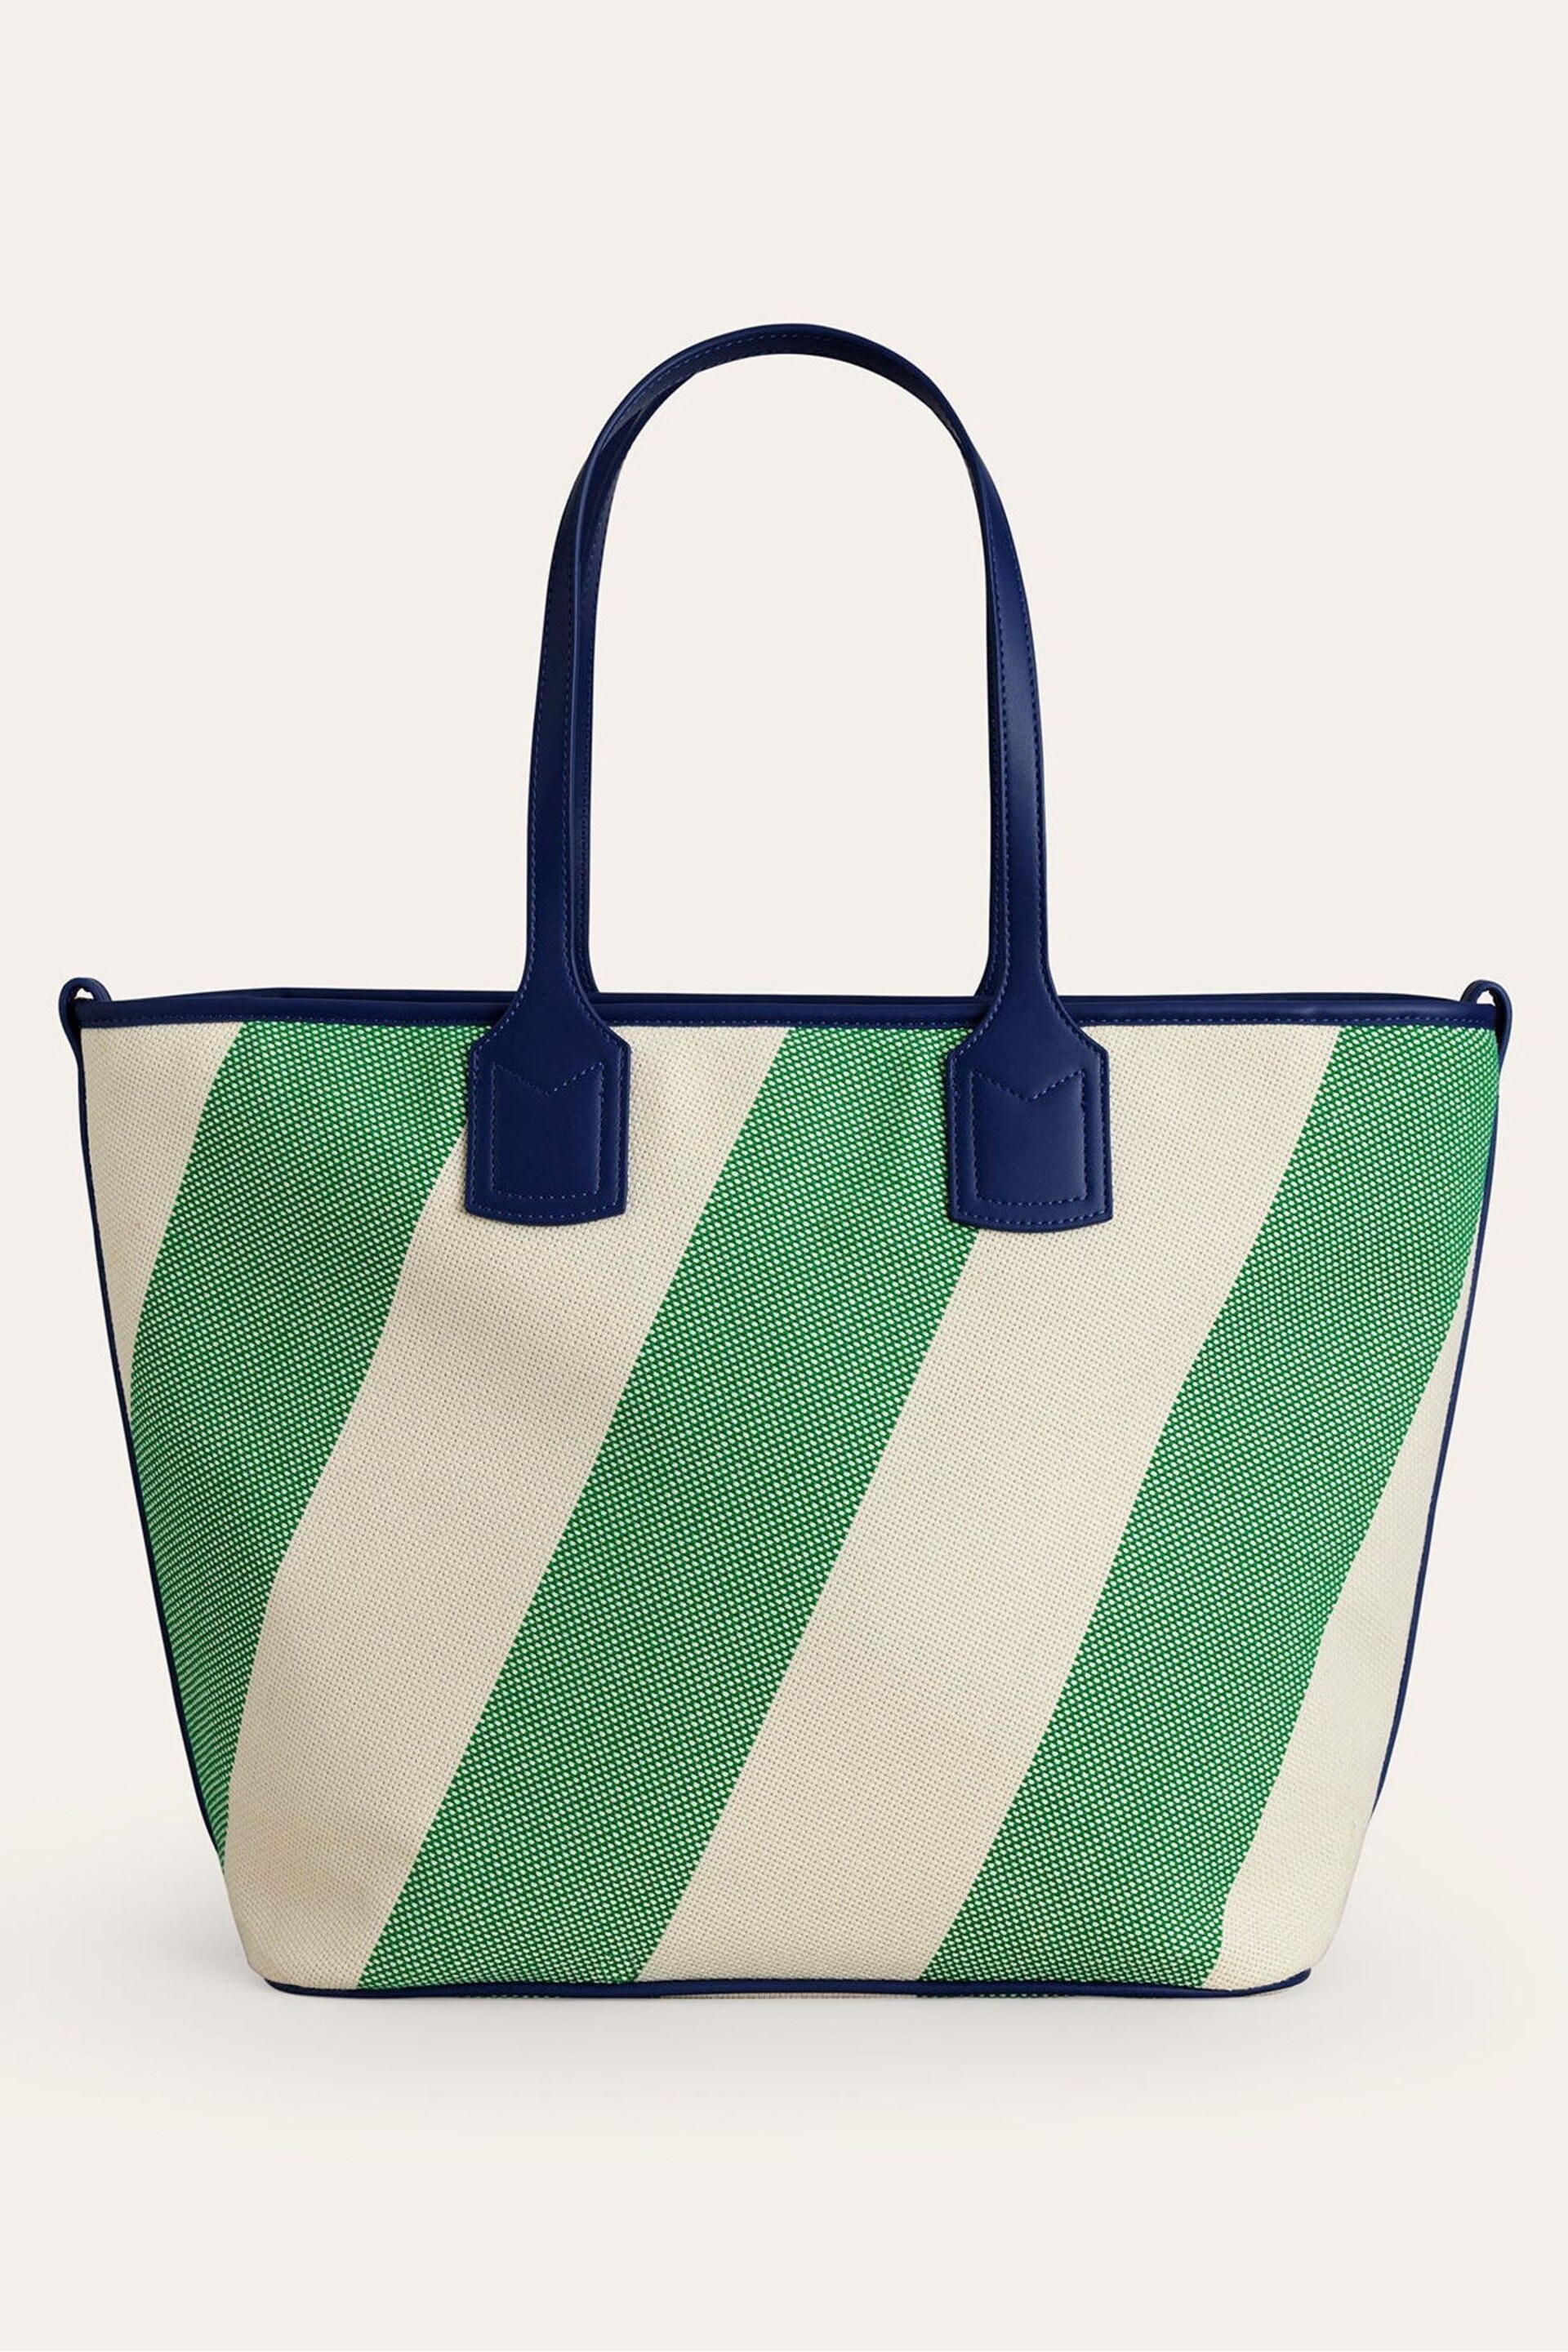 Boden Green Trapeze Tote Bag - Image 2 of 4